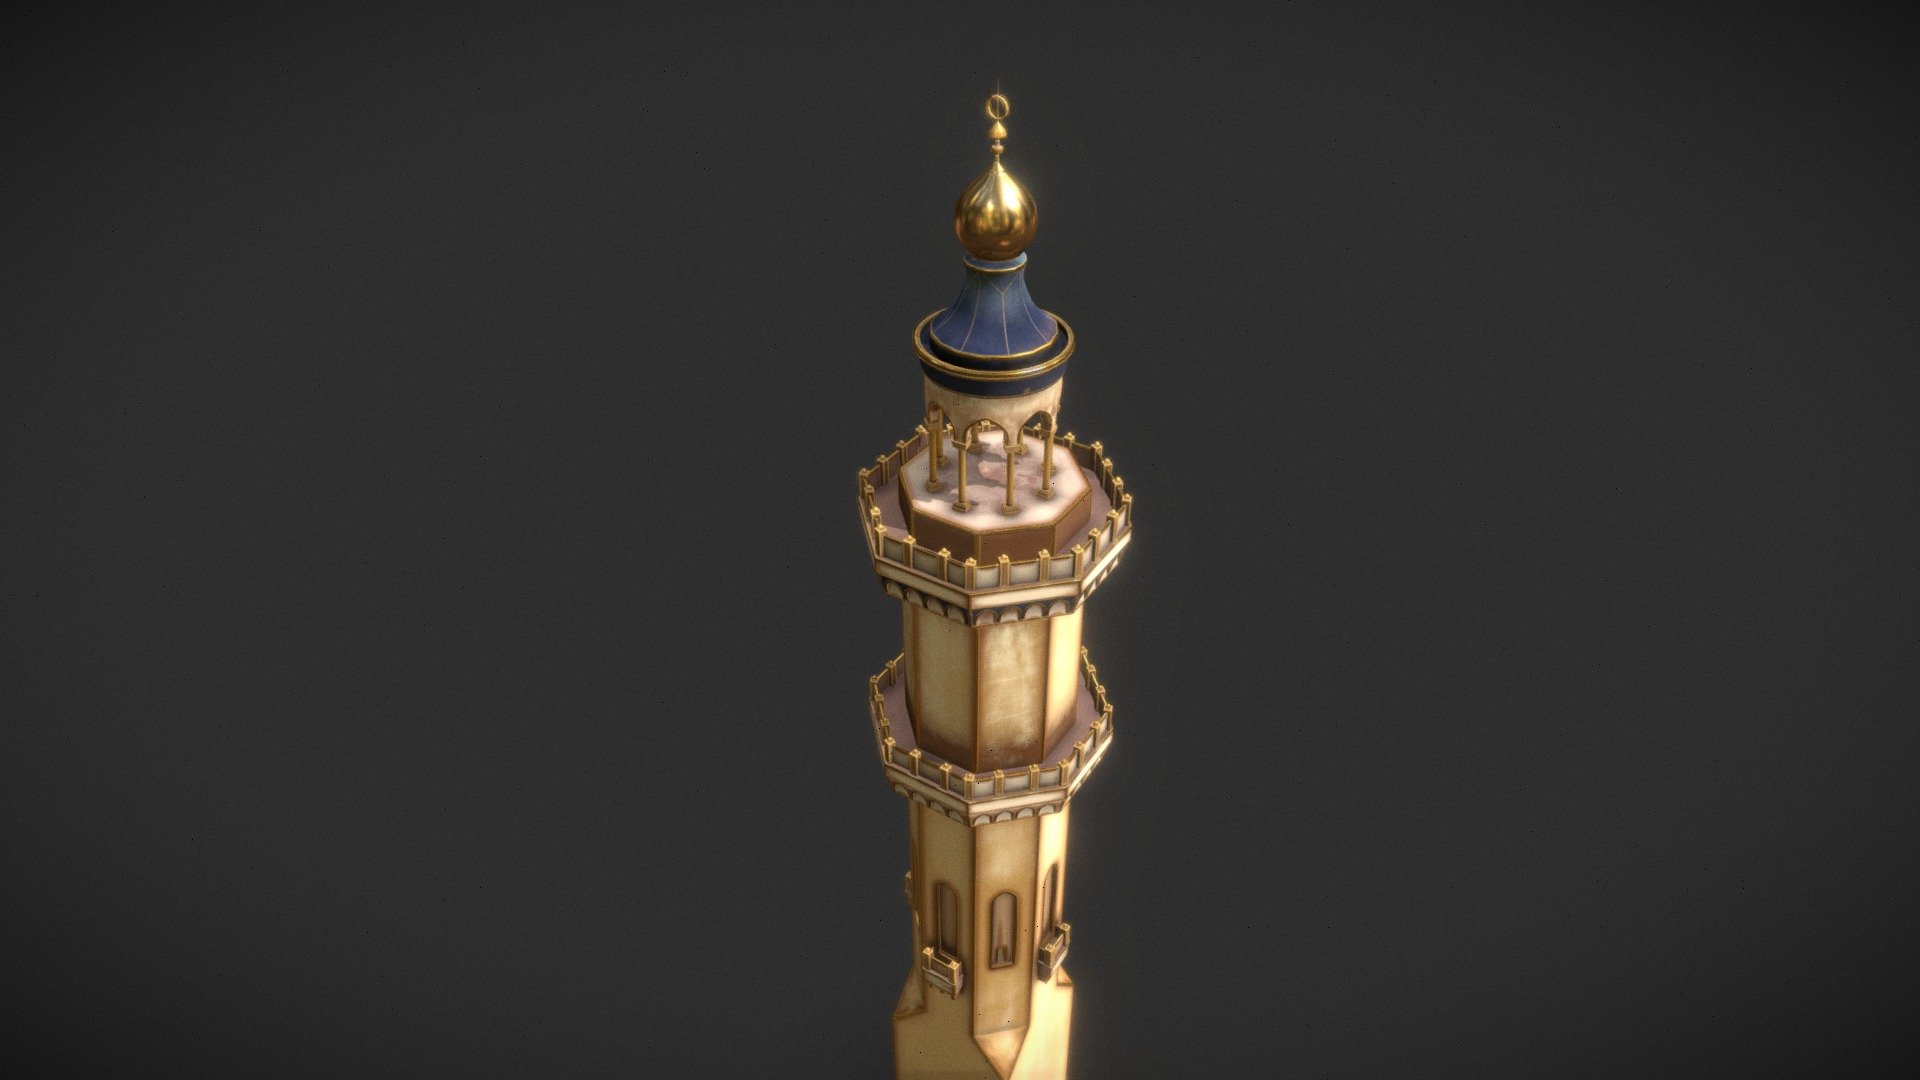 Minarets of the mosque from the next project ✨
This project will be the biggest project I've ever worked on - Minarets of the mosque - 3D model by Ali.Hassan (@alihassanart) 3d model